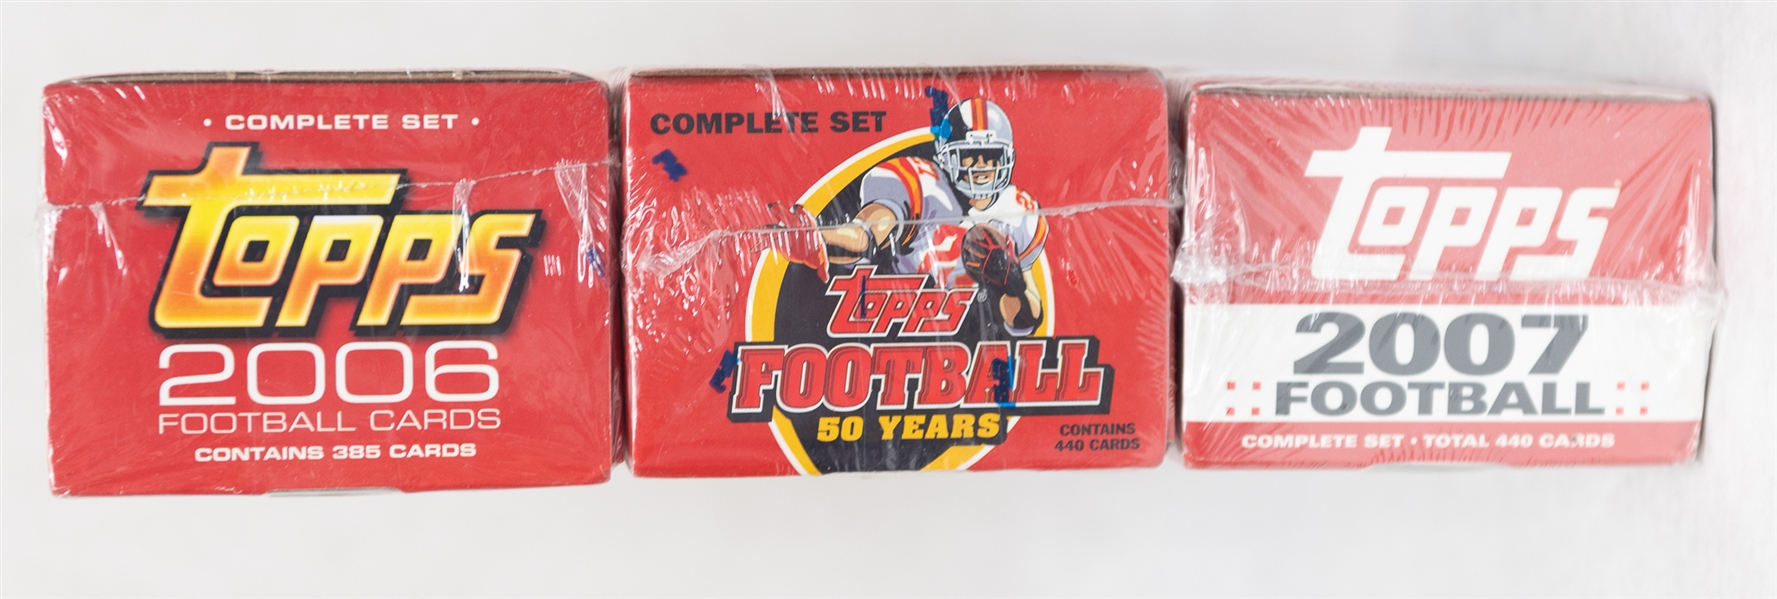 2005 (Aaron Rodgers Rookie Year), 2006 & 2007 Topps Football Sealed Complete Sets